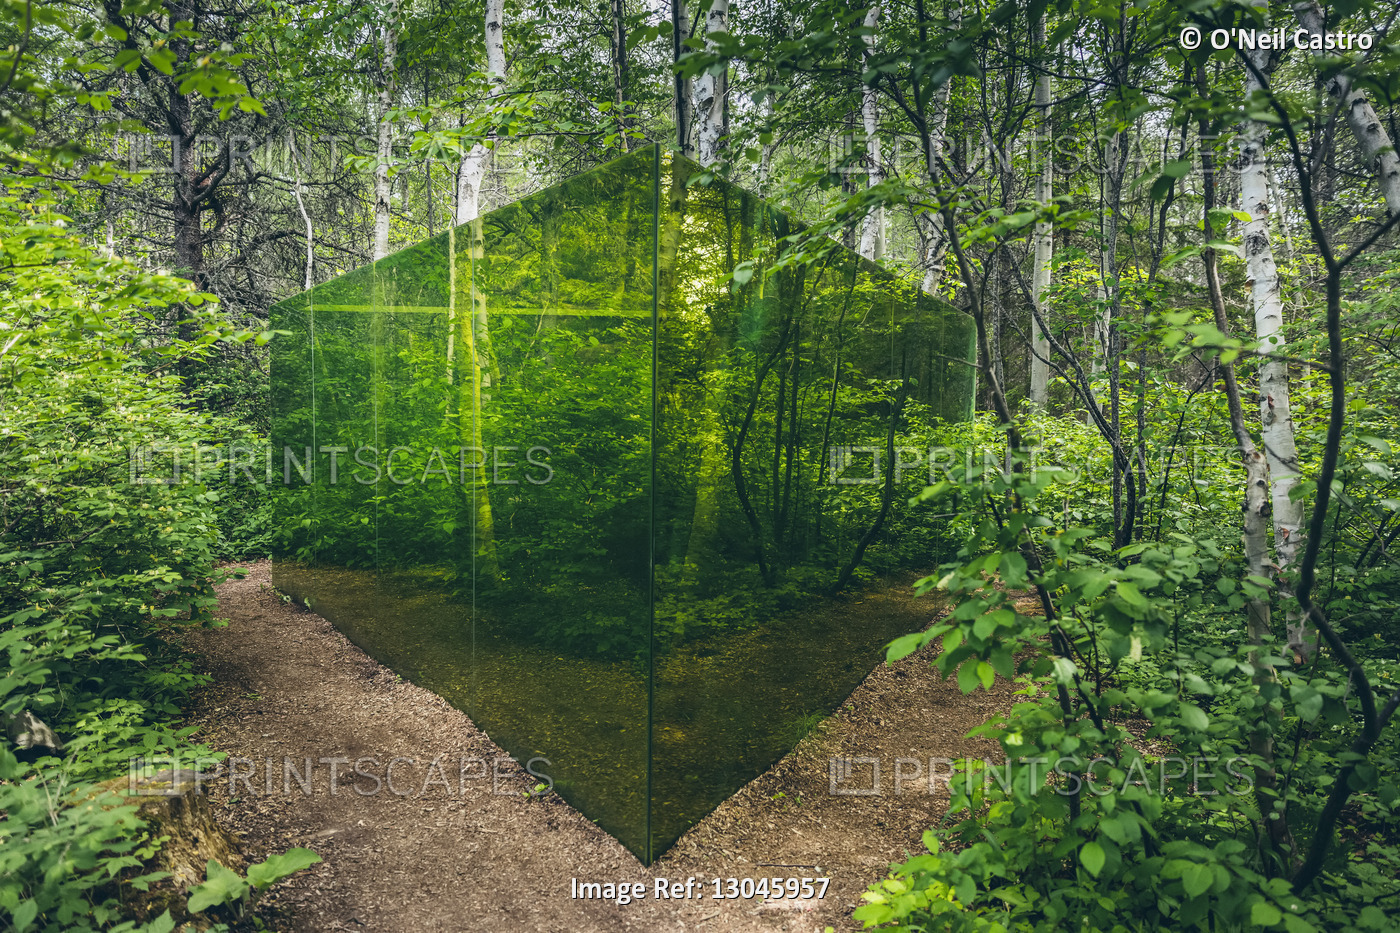 Art installation of green glass walls in a forest, Reford Gardens; Price, ...